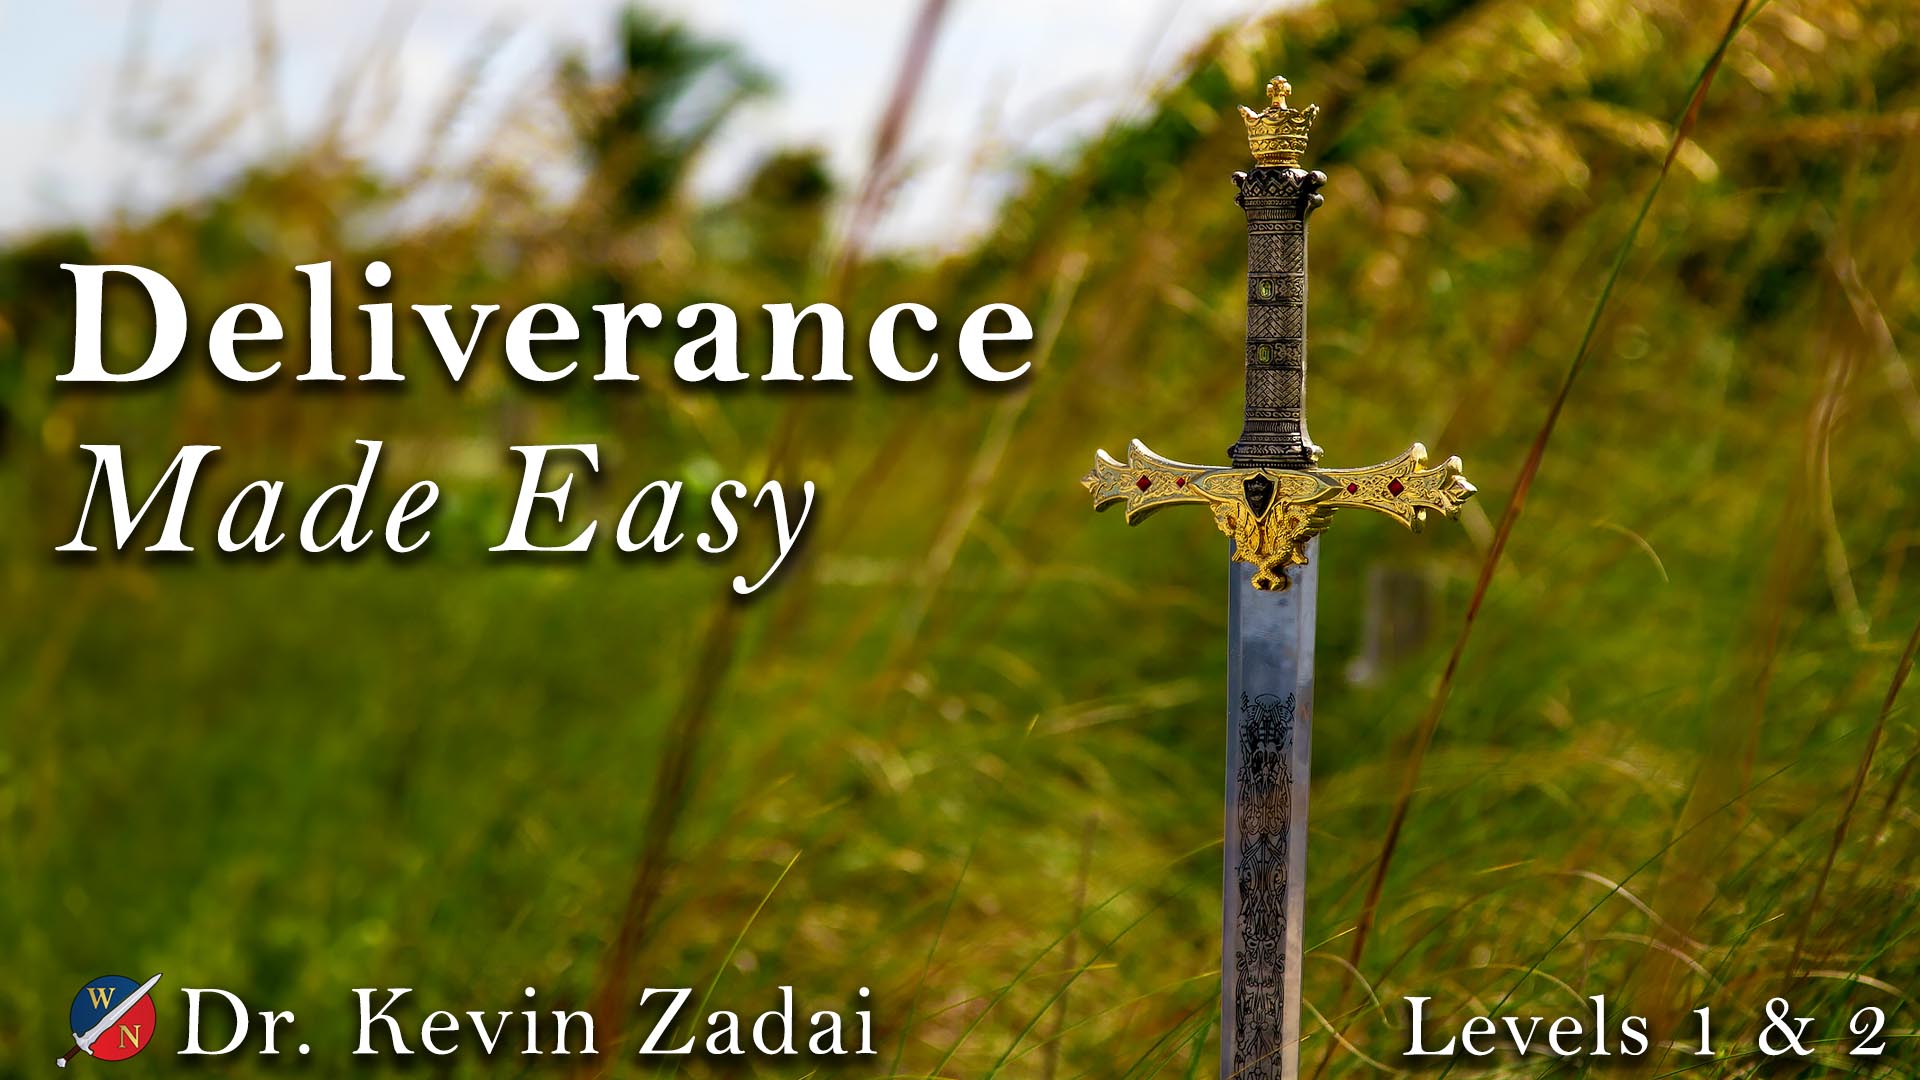 Deliverance Made Easy by Dr. Kevin Zadai